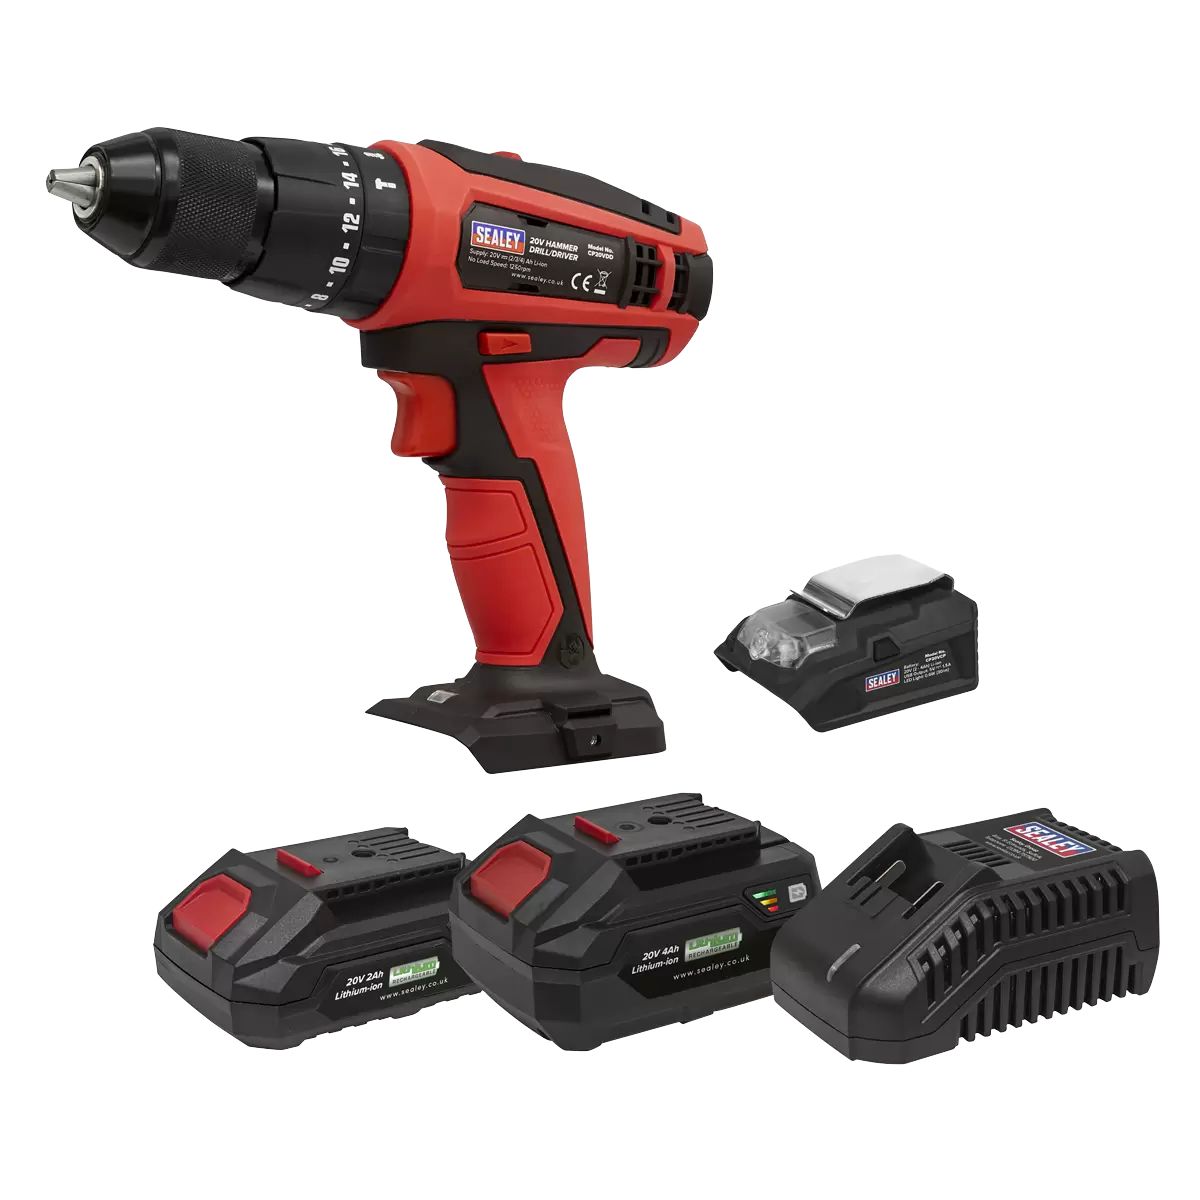 Sealey CP20VDDKIT 20V 13mm Combi Drill Kit with 2 x 2.0Ah Batteries & Charger